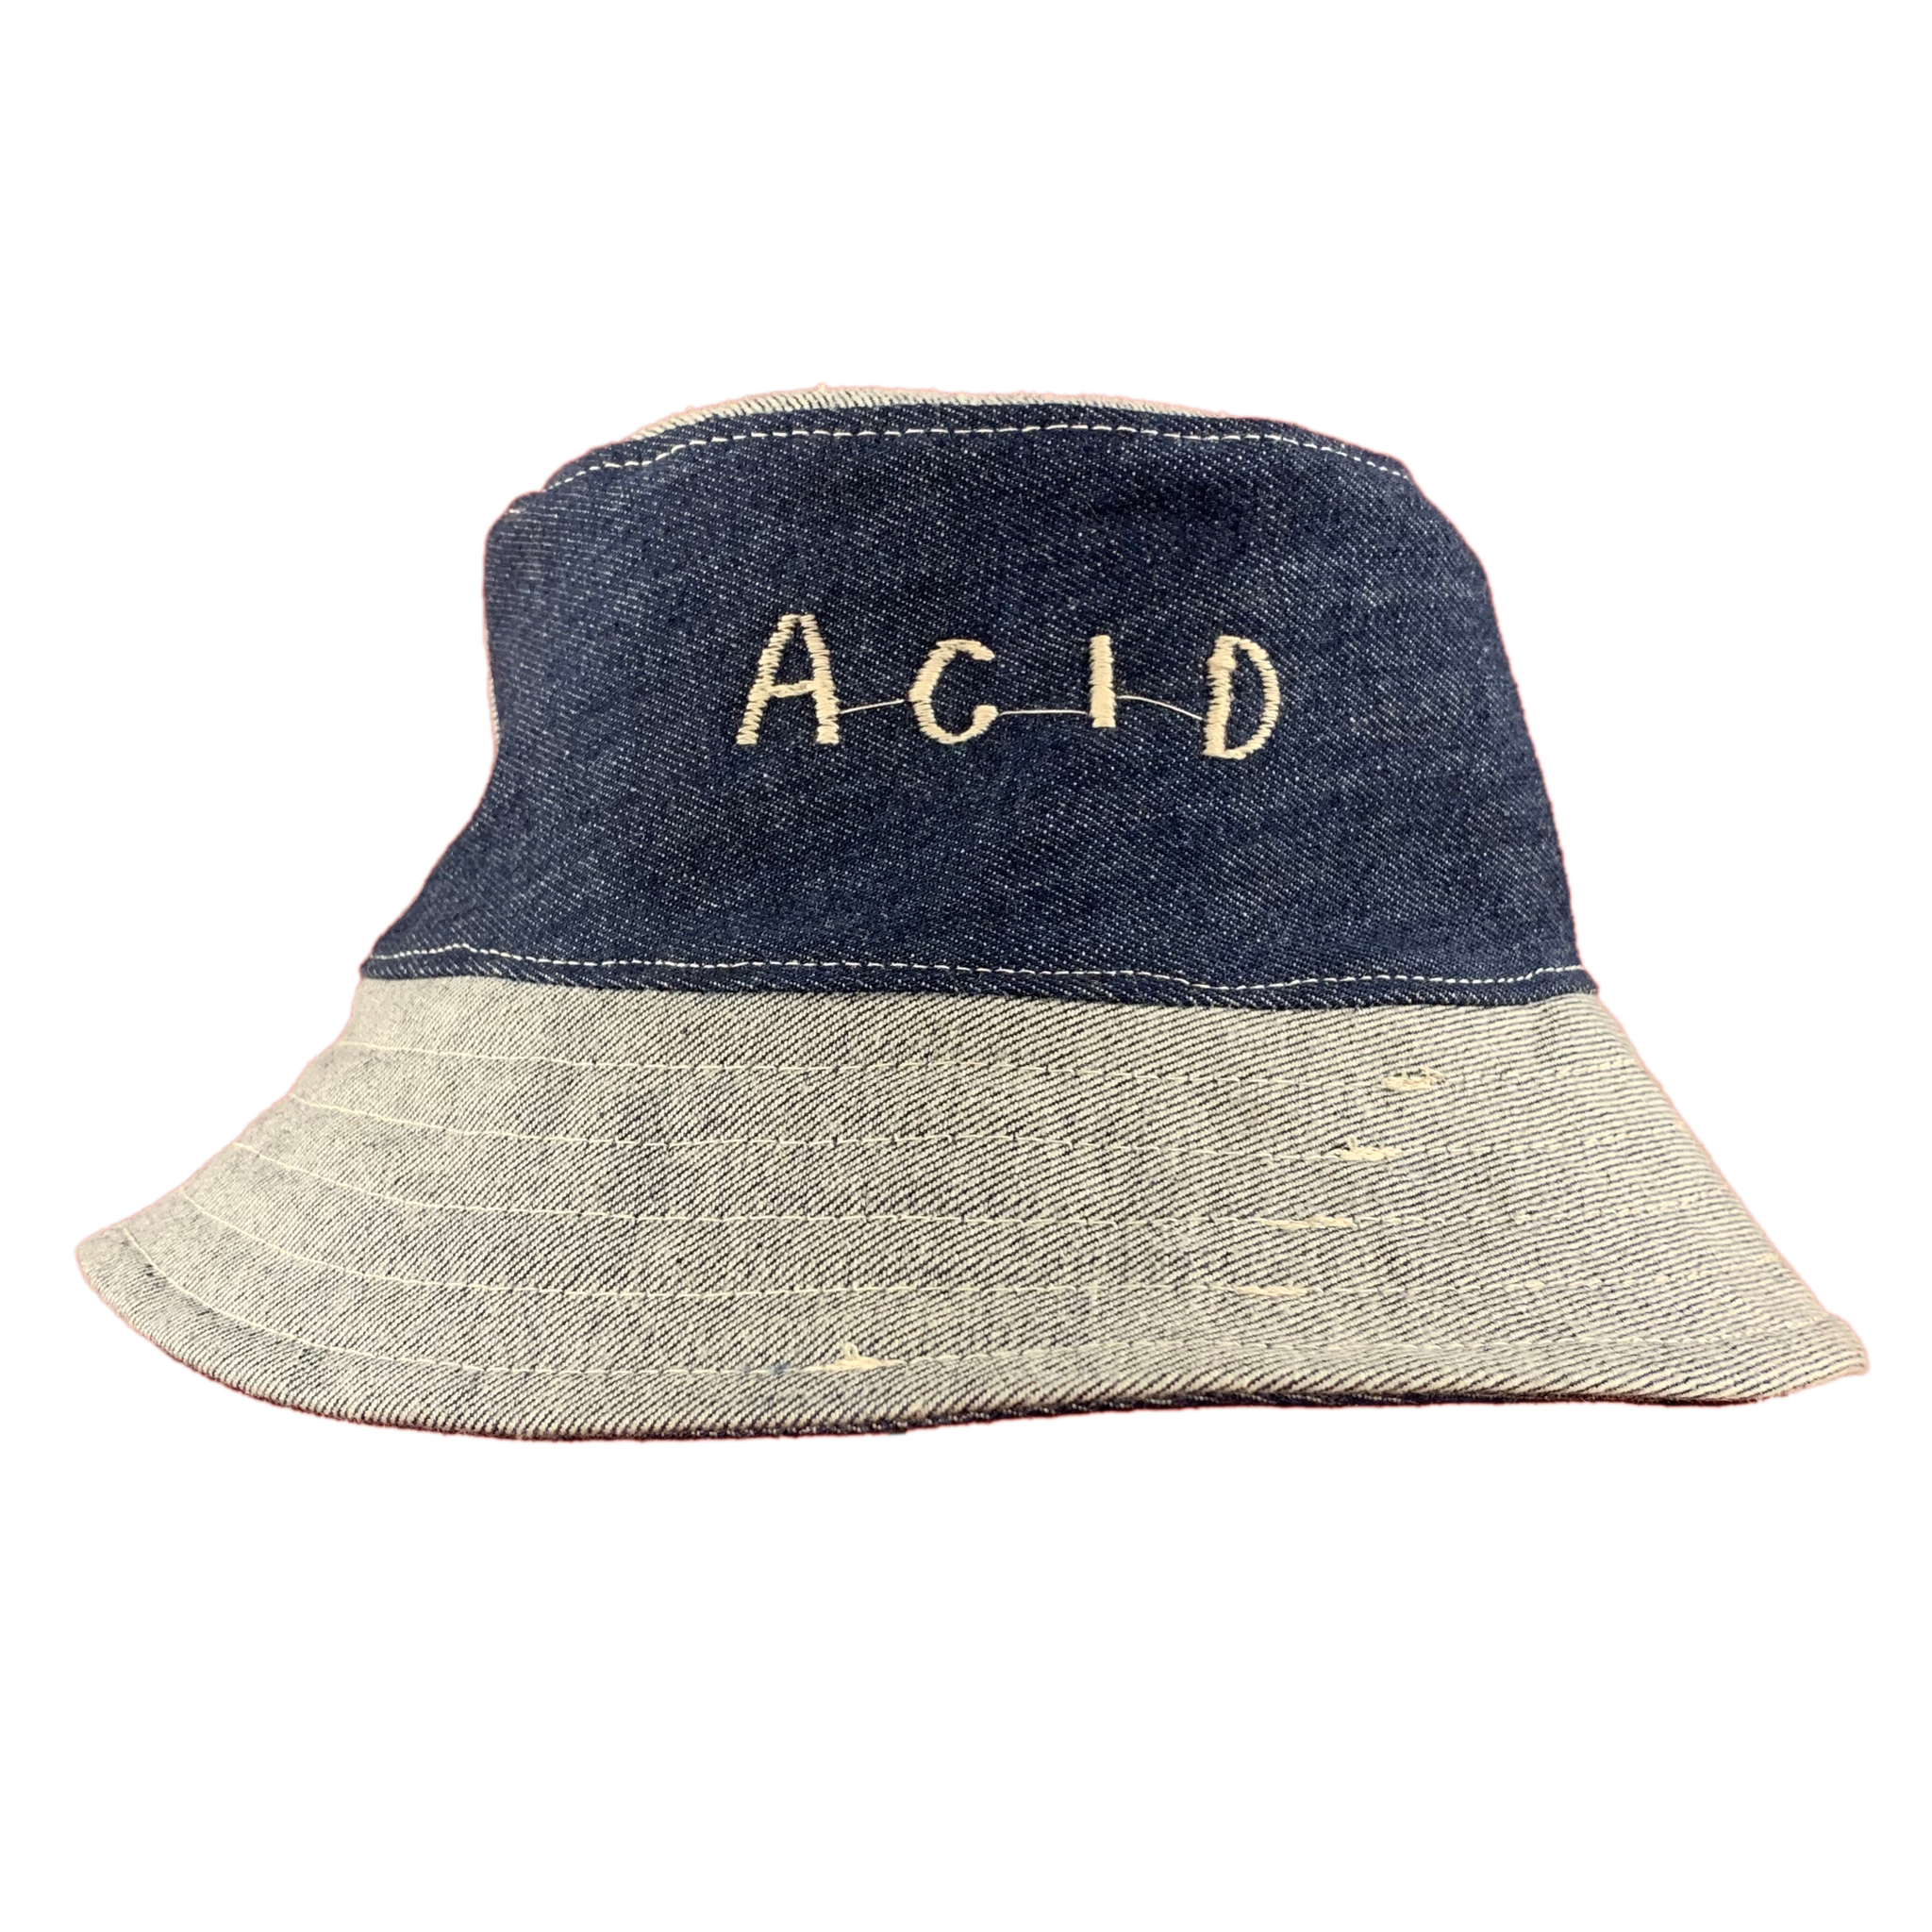 Hand Made Embroidered Bucket Hat - Small